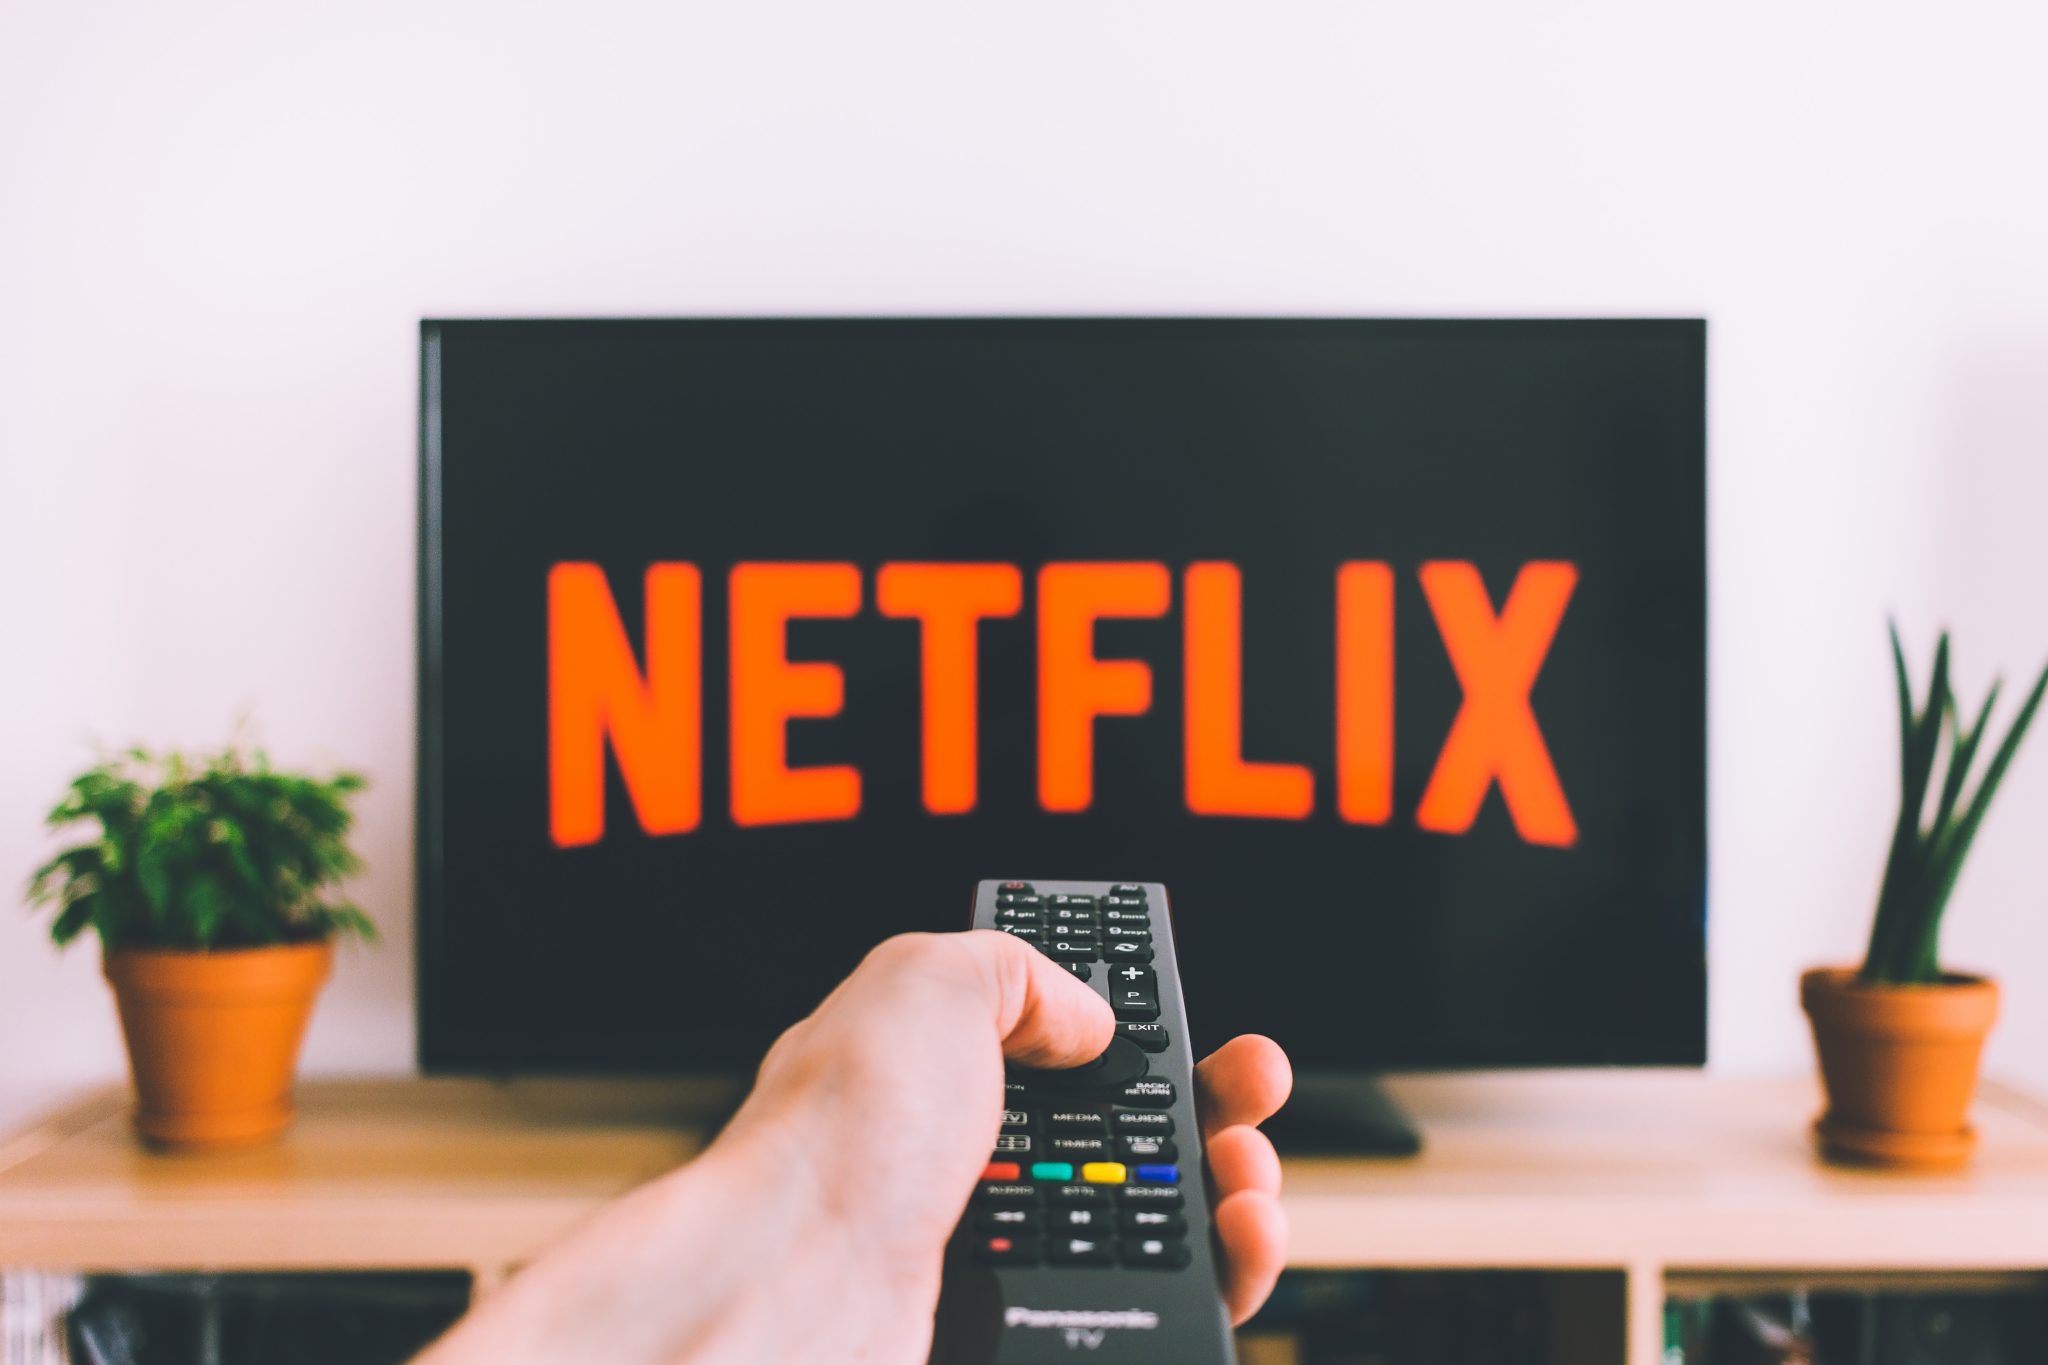 Hand pointing TV remote control at a screen showing Netflix on it